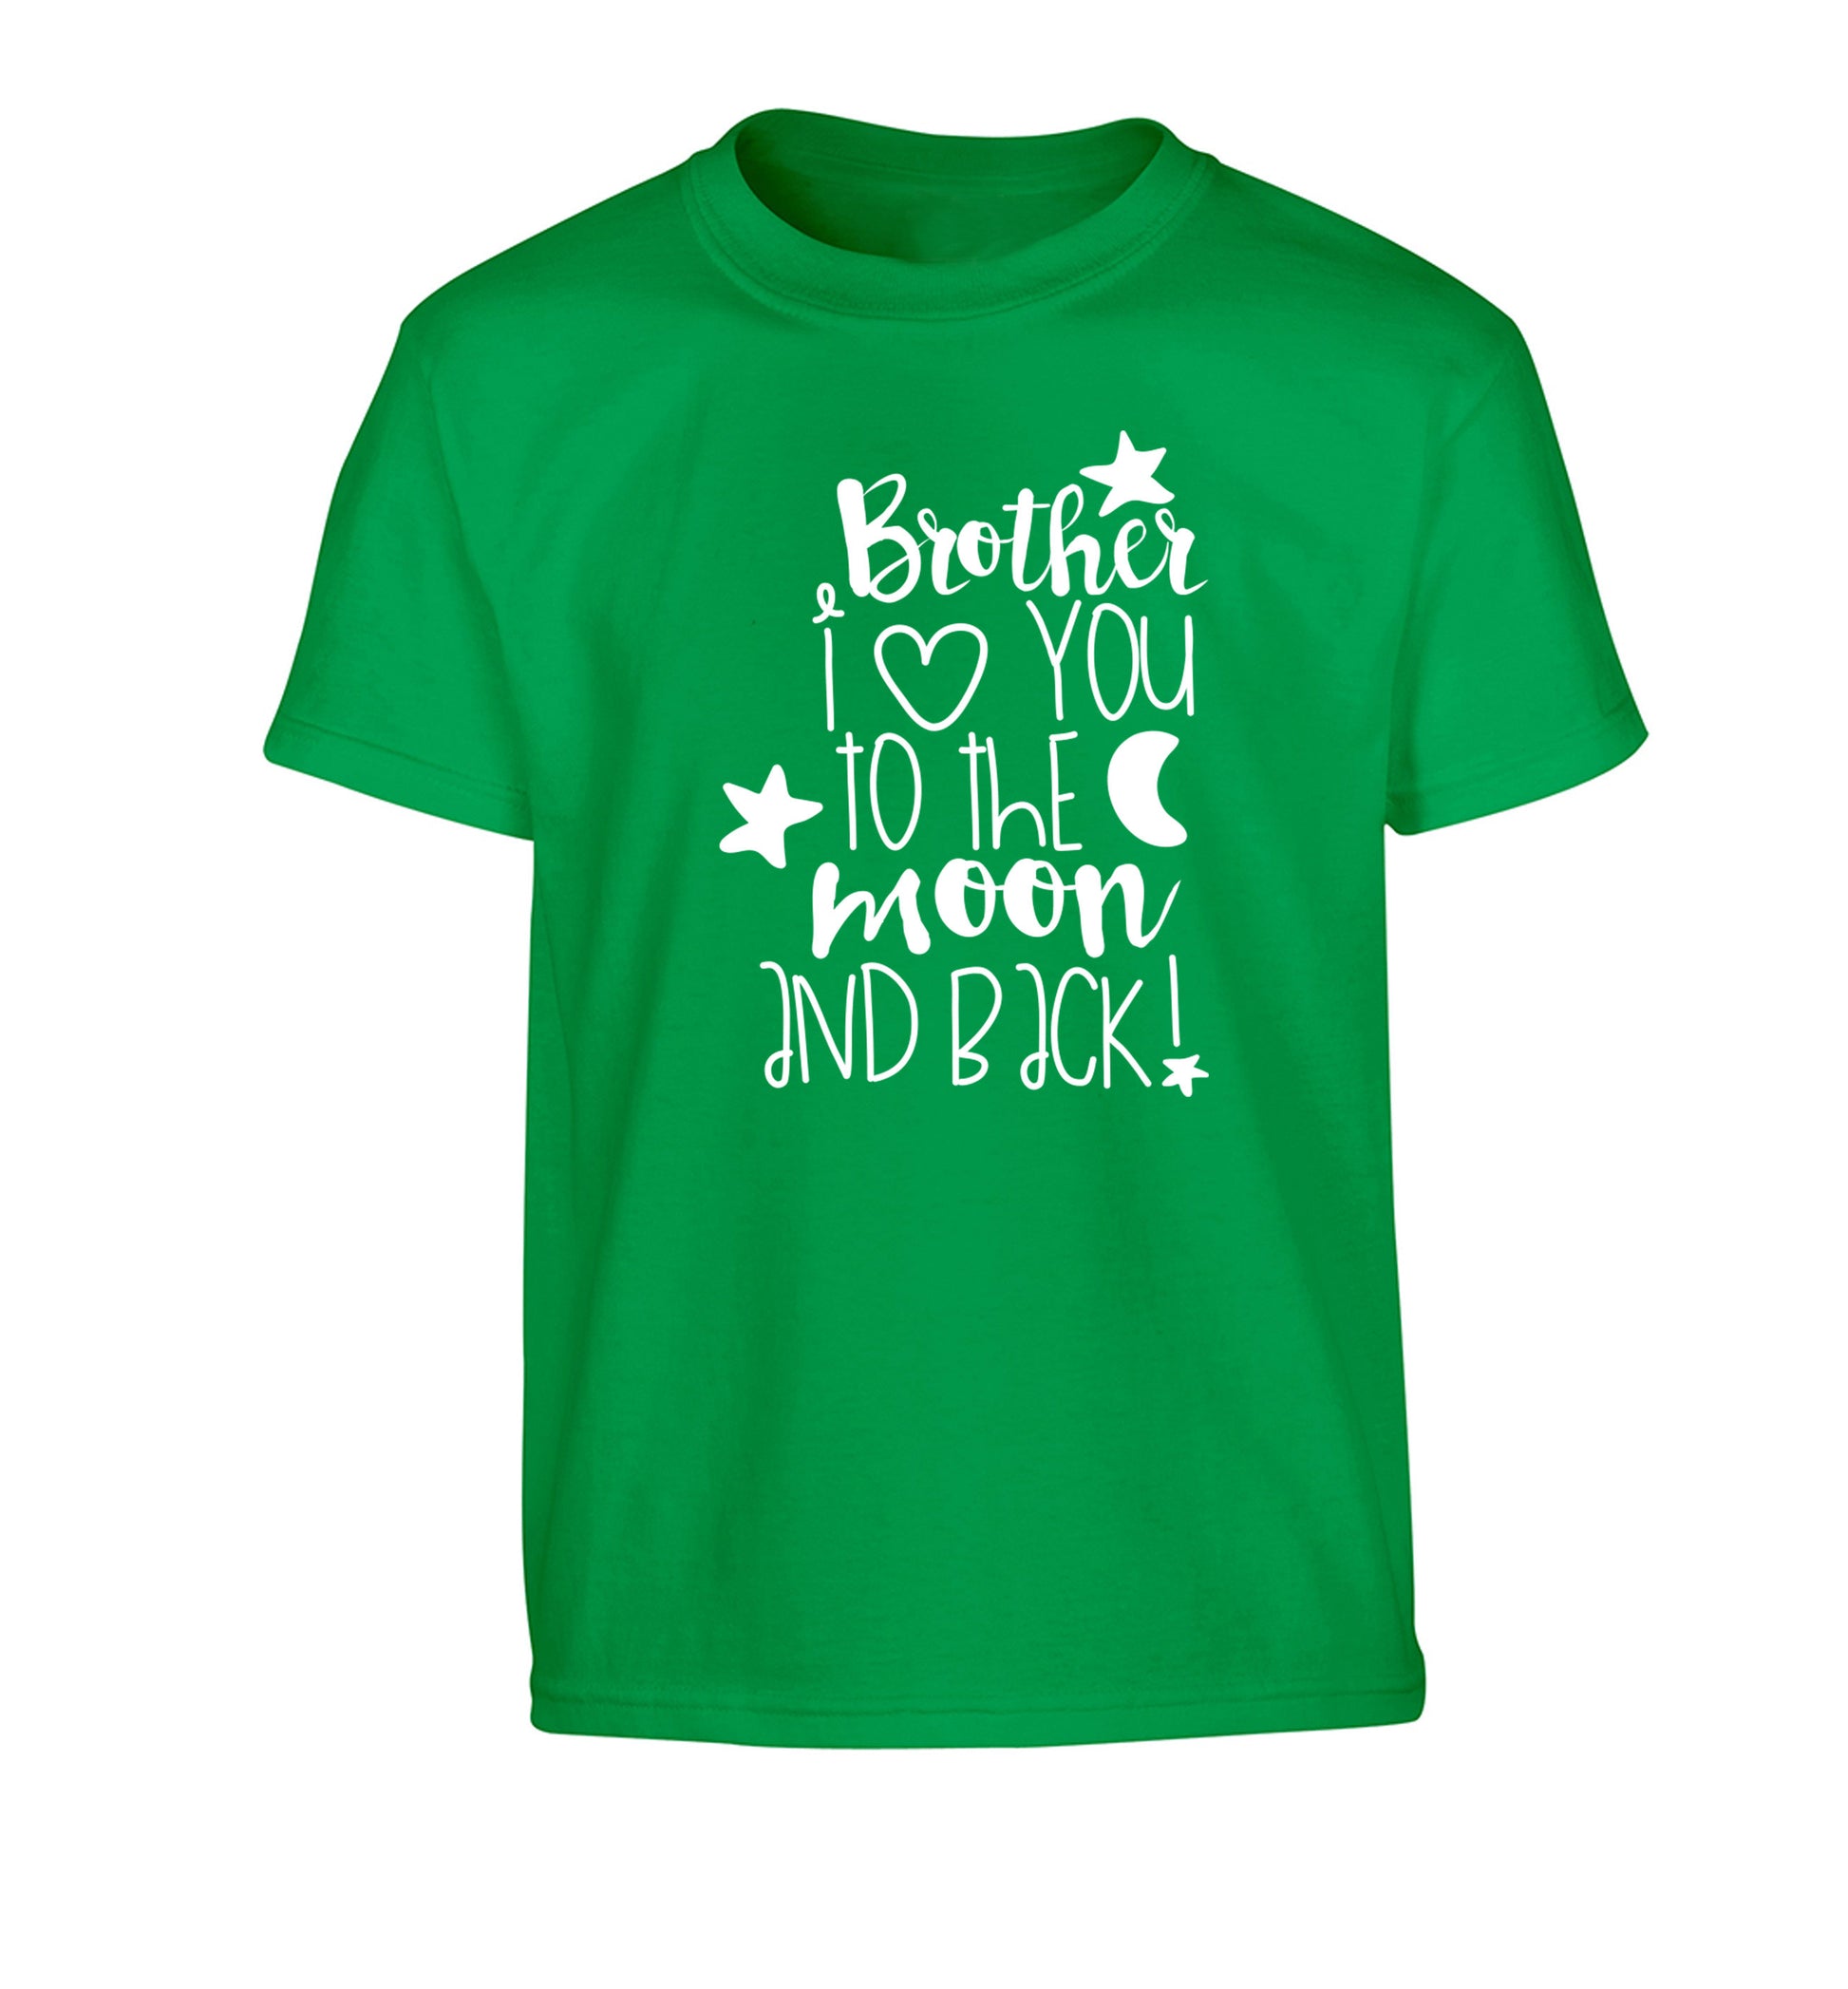 Brother I love you to the moon and back Children's green Tshirt 12-14 Years